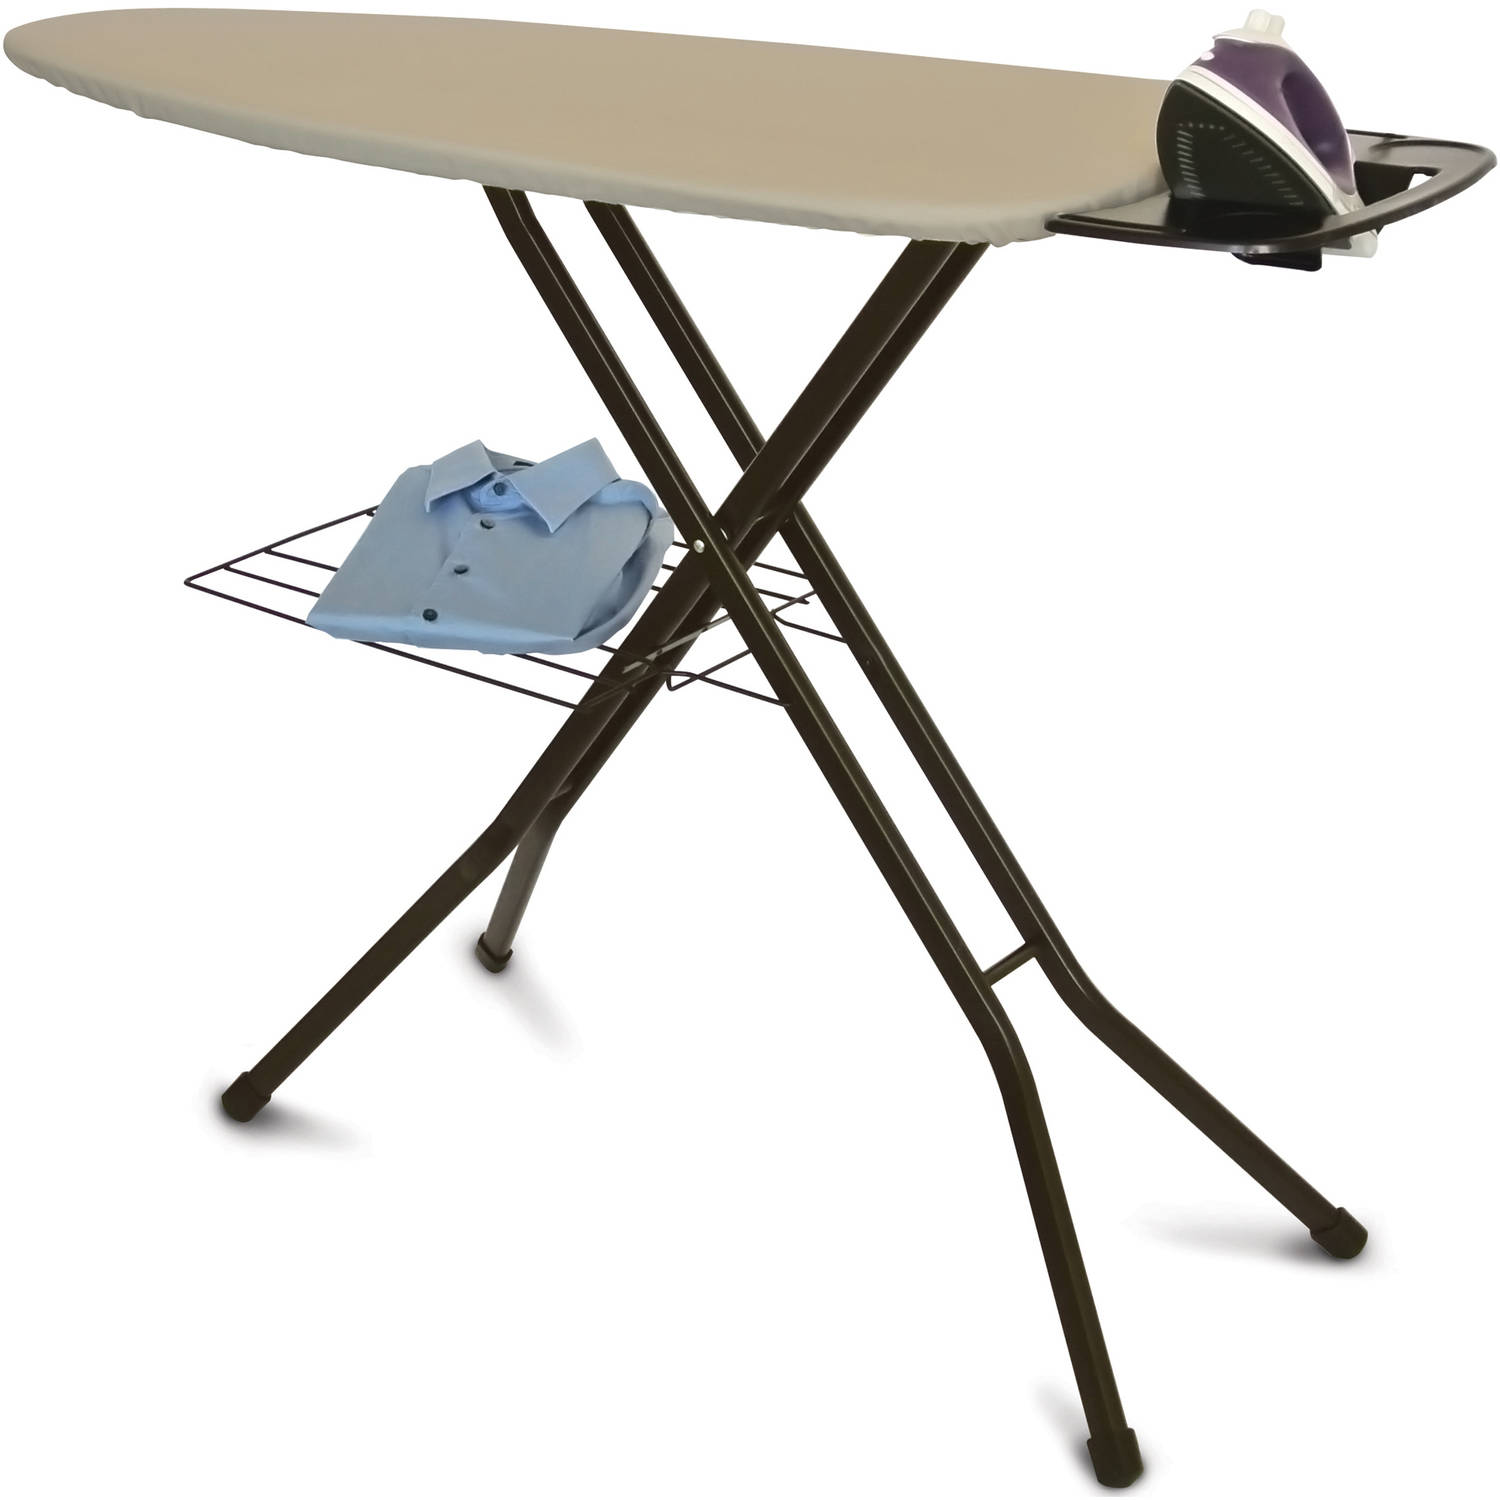 Better Homes and Gardens Wide Top Ironing Board, Khaki - image 1 of 3